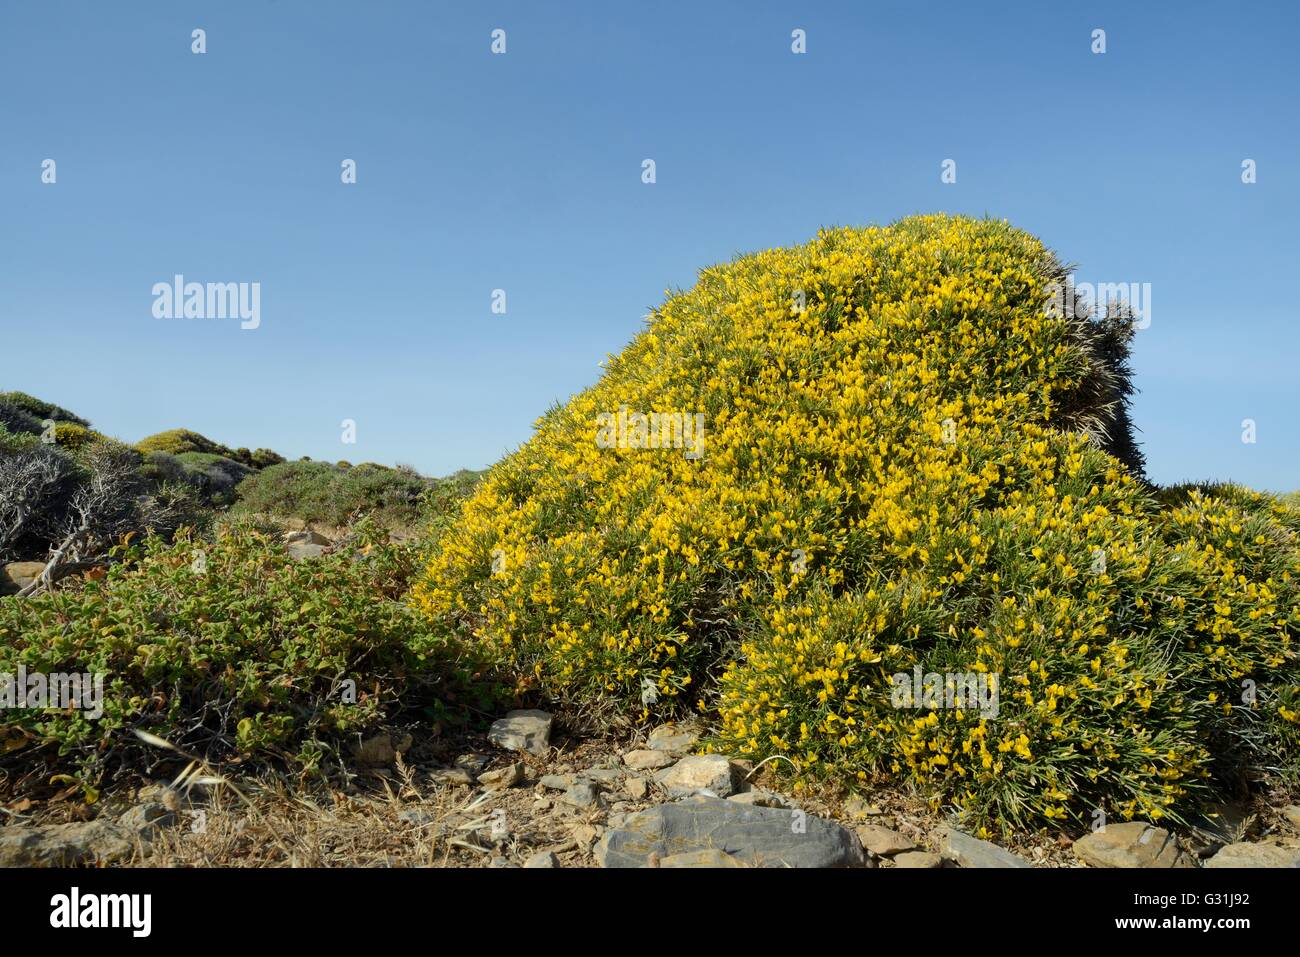 Clump of low growing Broom (Genista acanthoclada) with spiny leaves among garrigue / phrygana scrubland, Lasithi, Crete, Greece Stock Photo